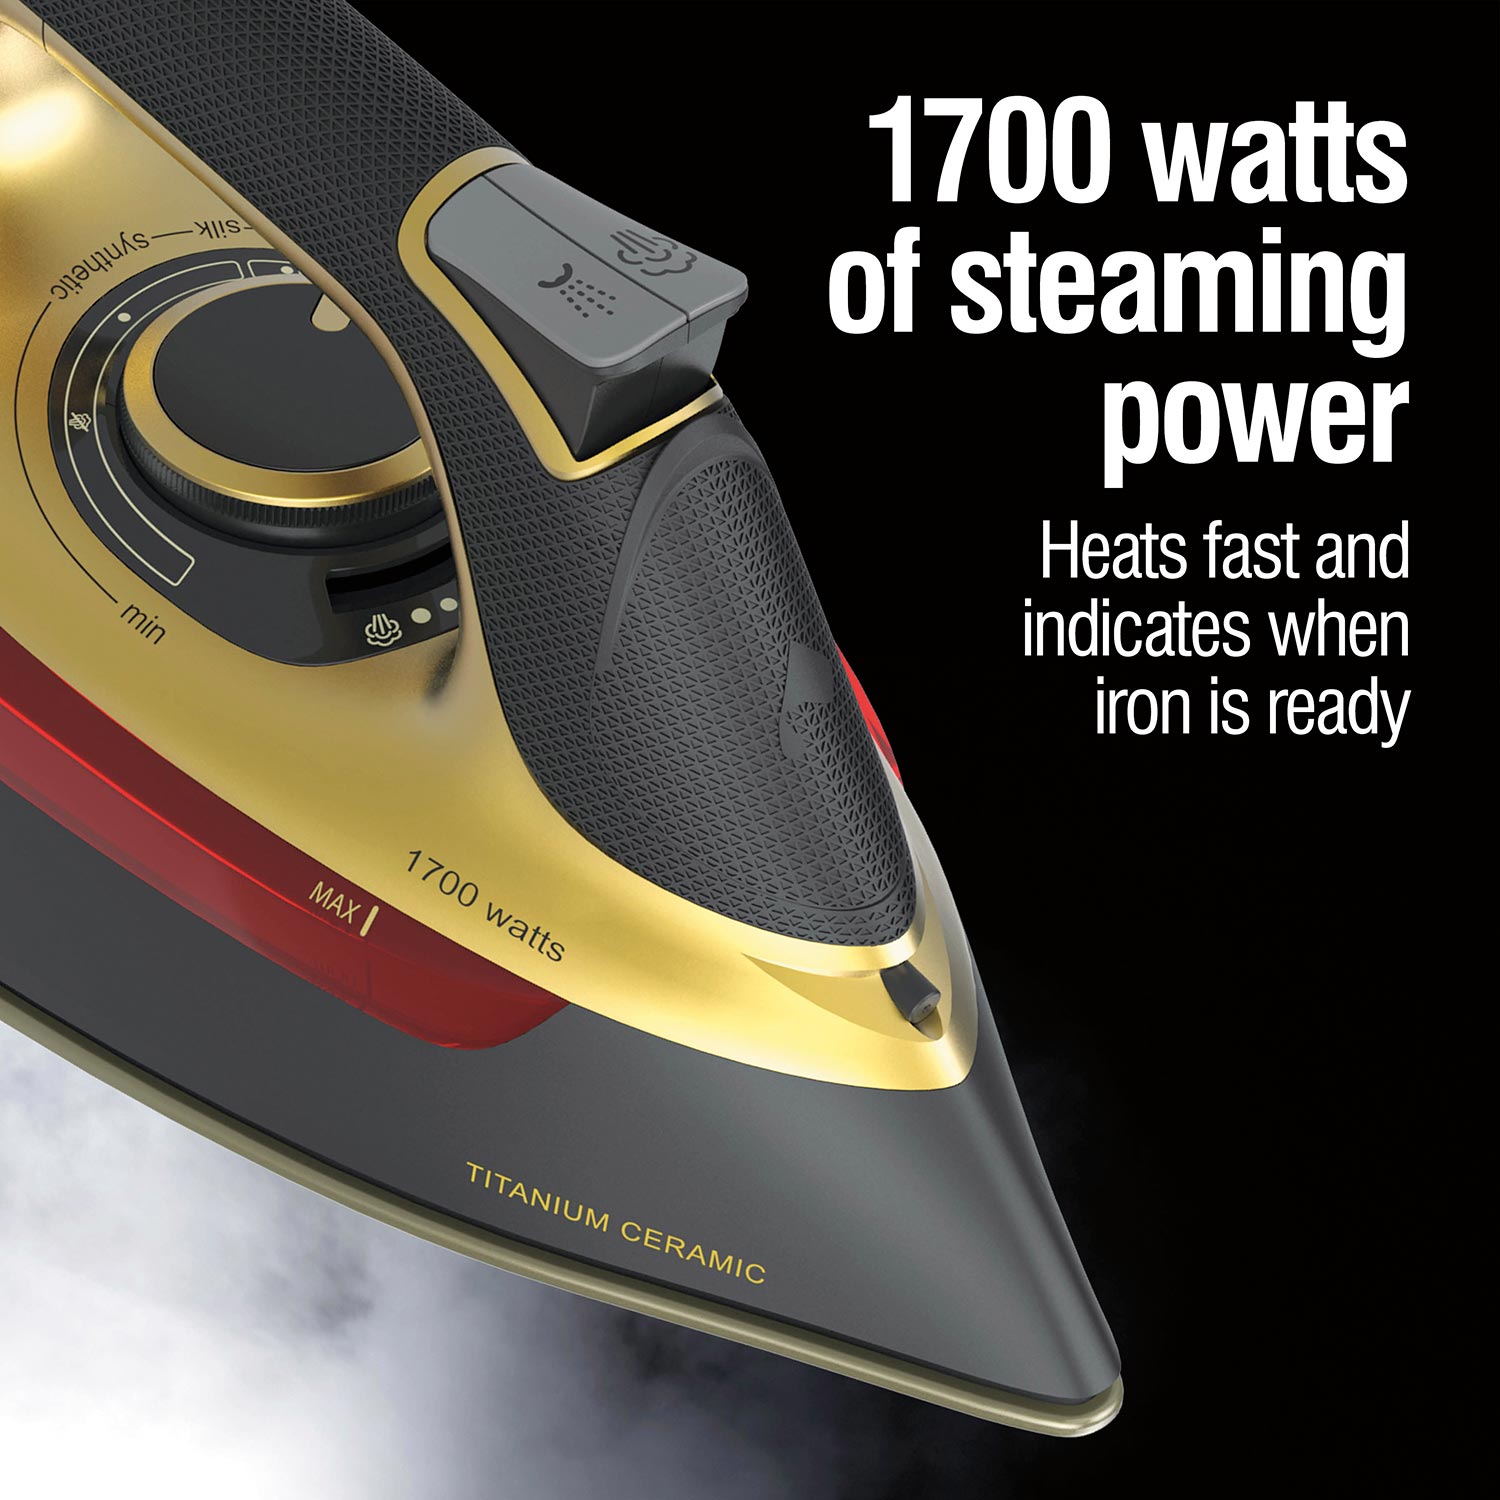 1700 watts of steaming power heats fast and indicates when iron is ready